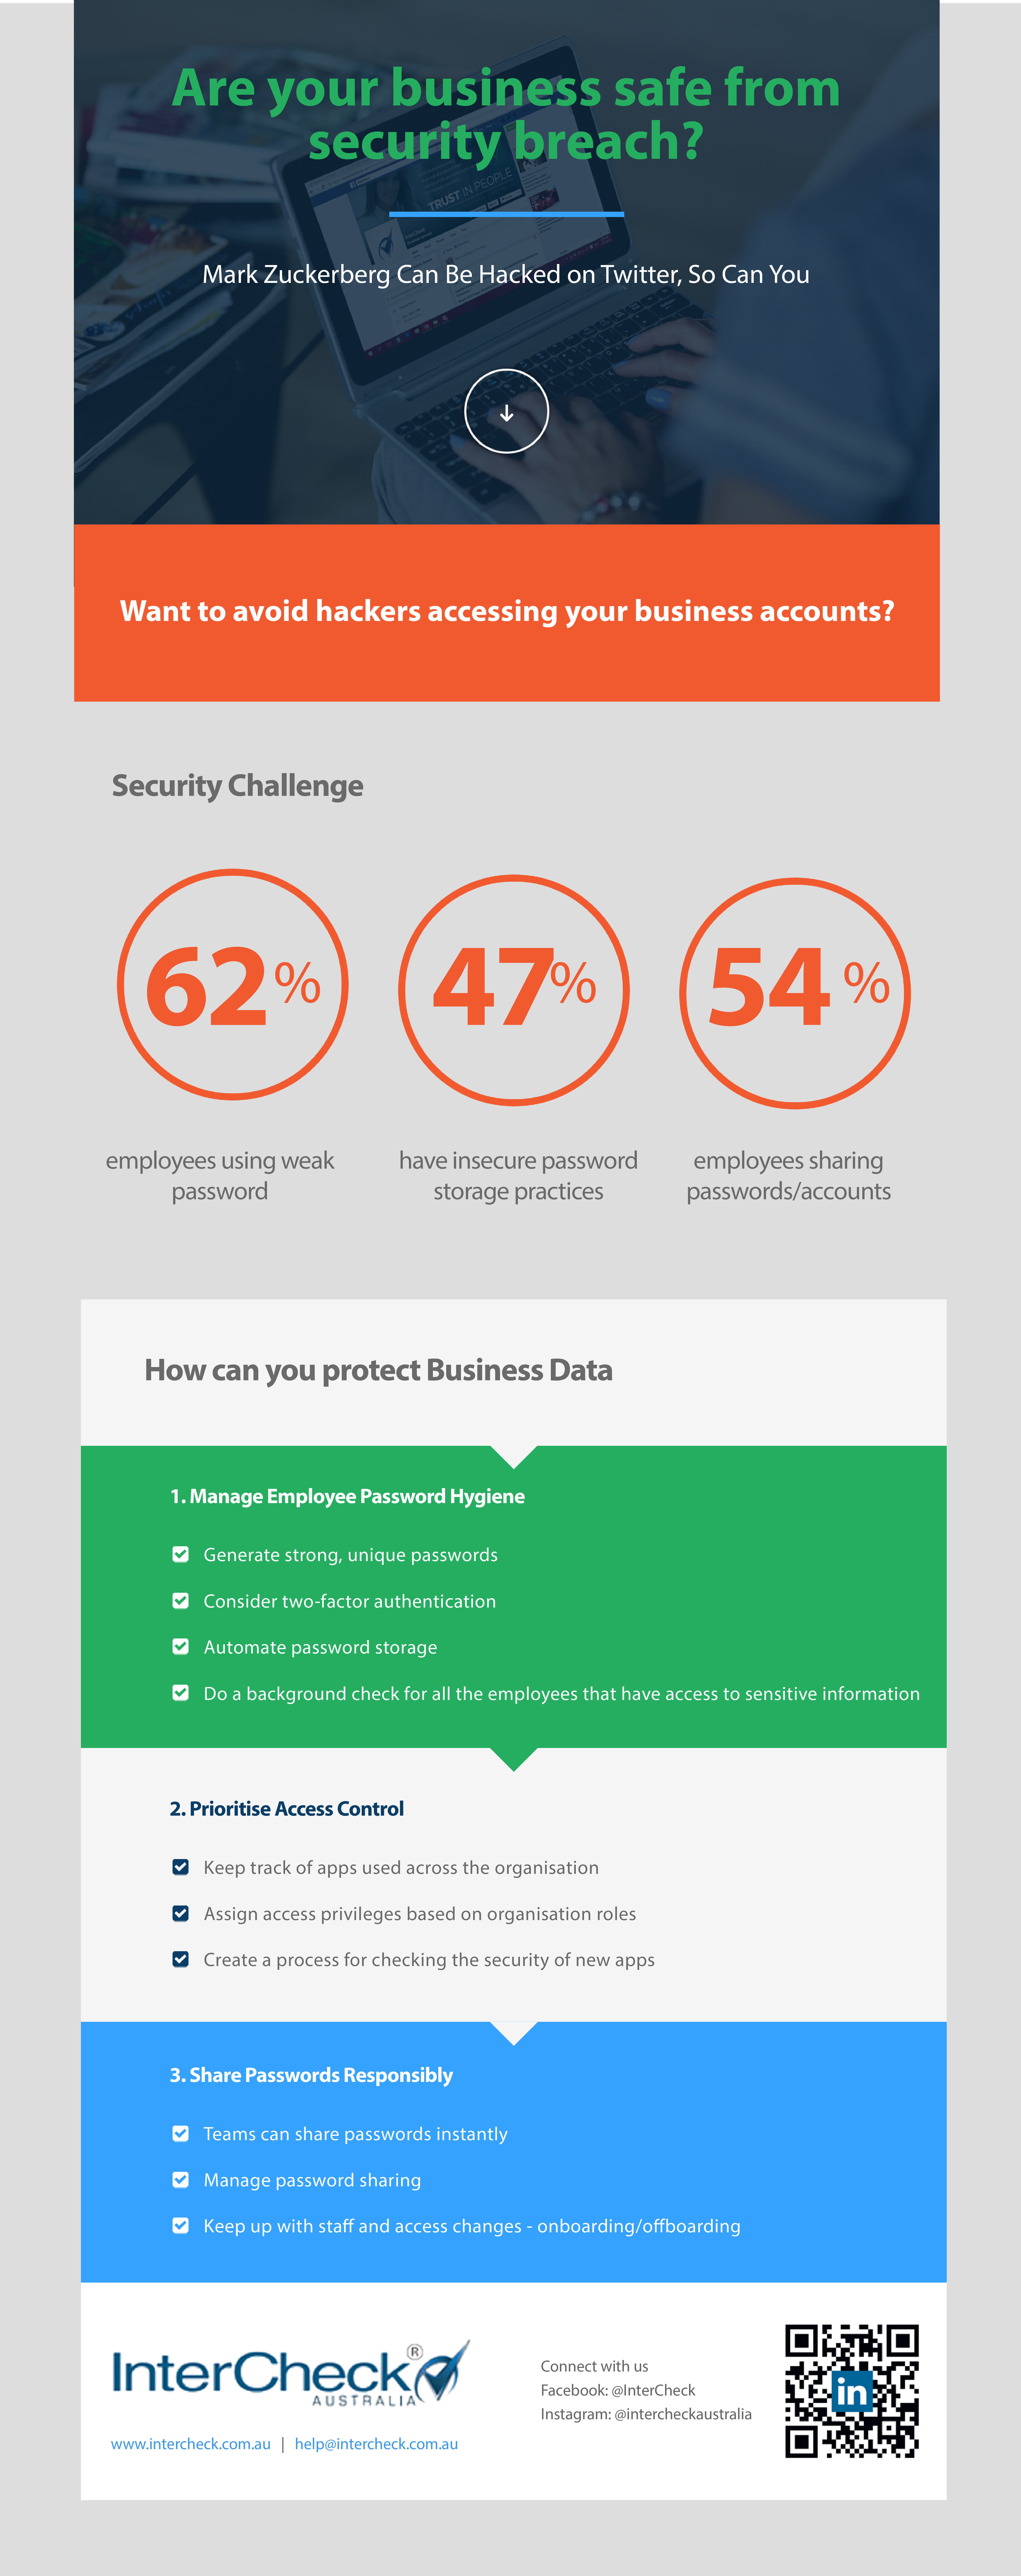 How to protect your business from security and data breach.